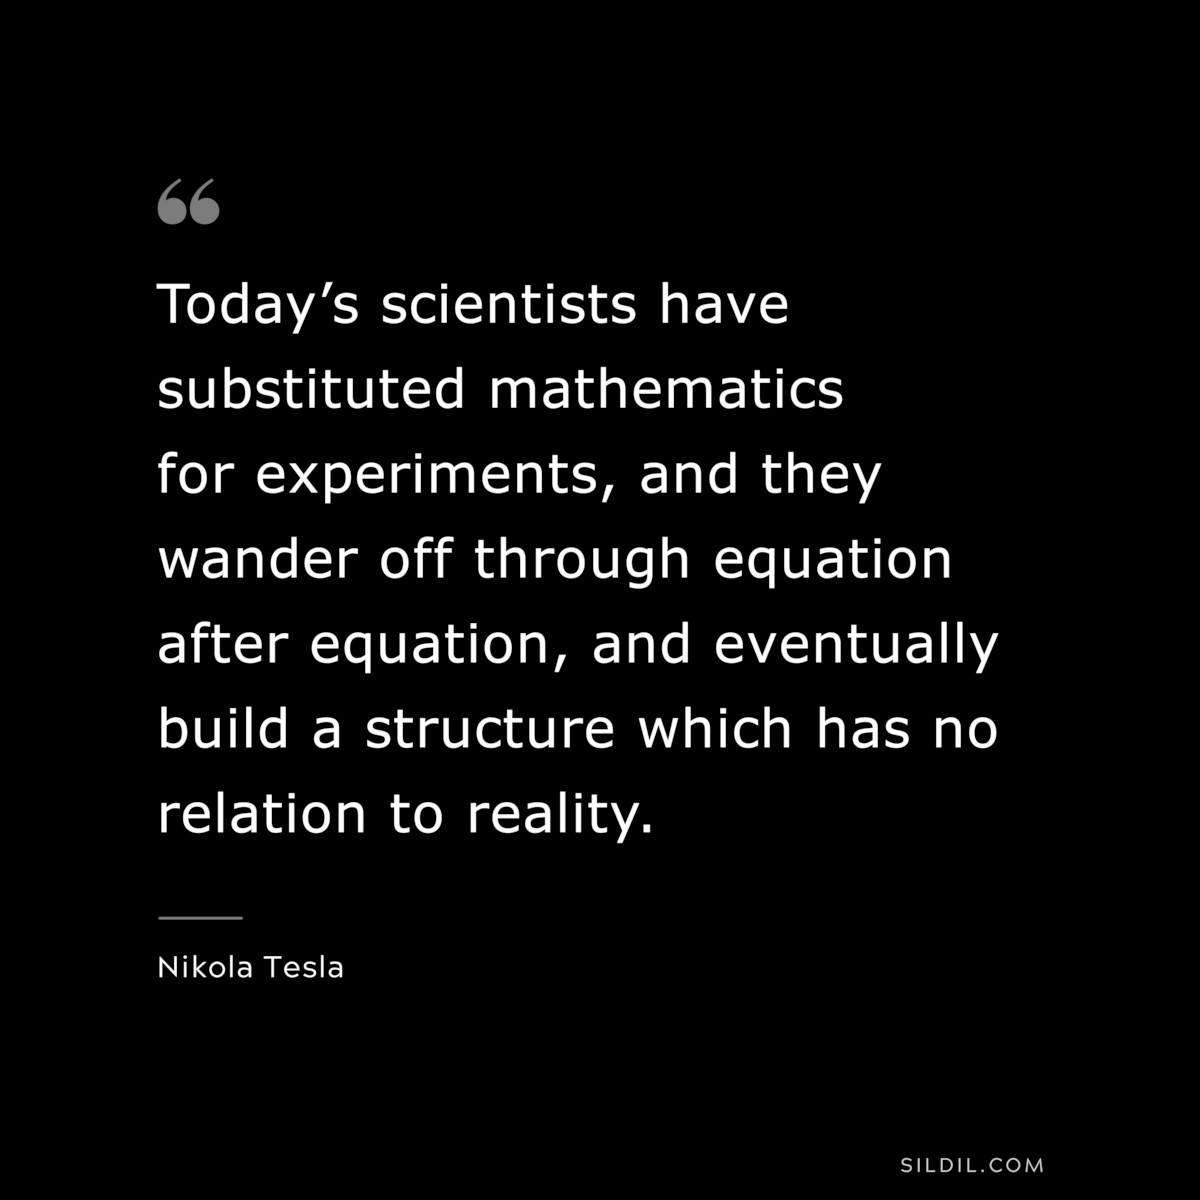 Today’s scientists have substituted mathematics for experiments, and they wander off through equation after equation, and eventually build a structure which has no relation to reality. ― Nikola Tesla